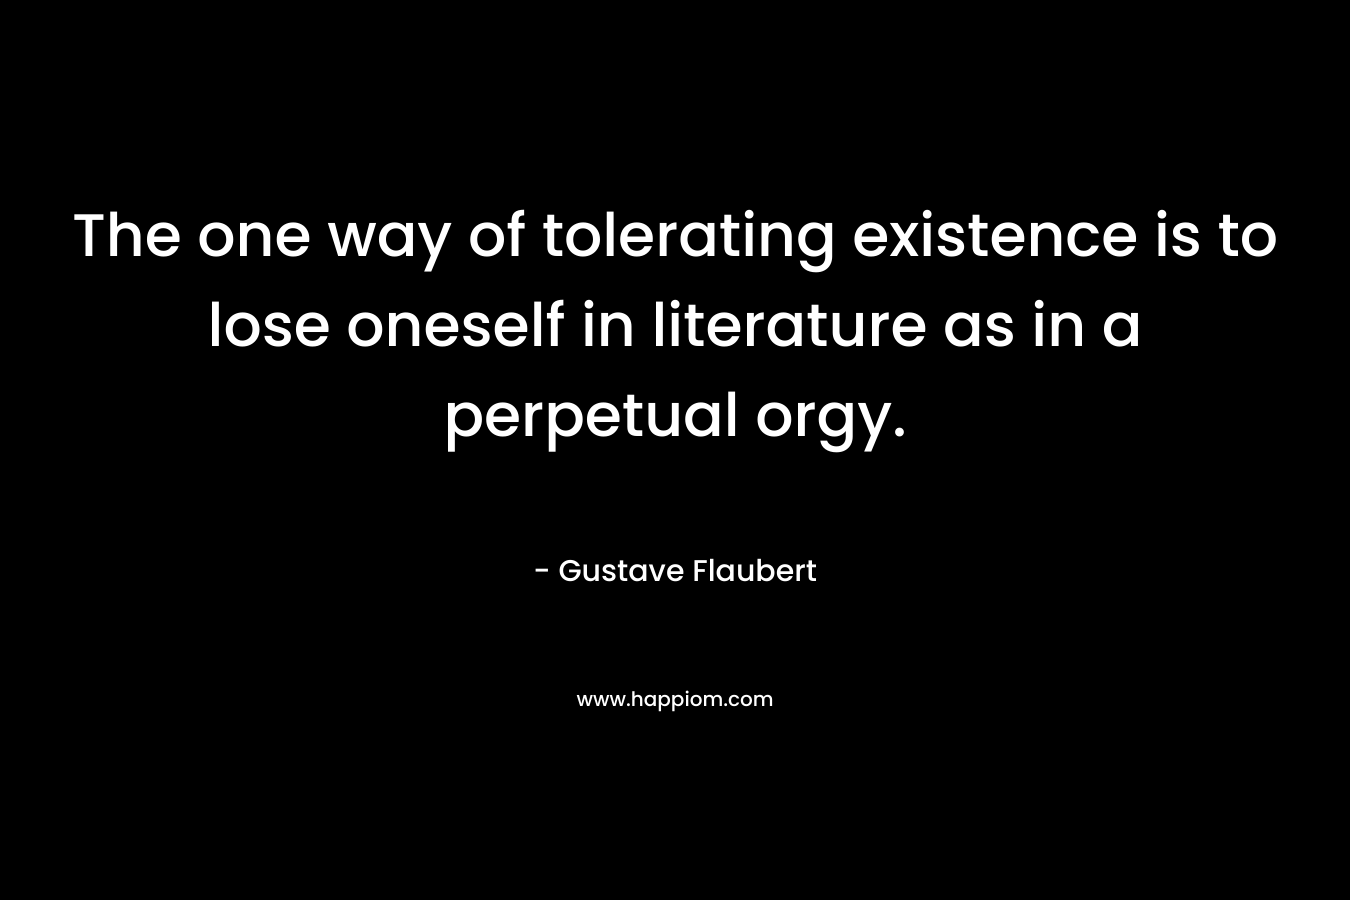 The one way of tolerating existence is to lose oneself in literature as in a perpetual orgy.